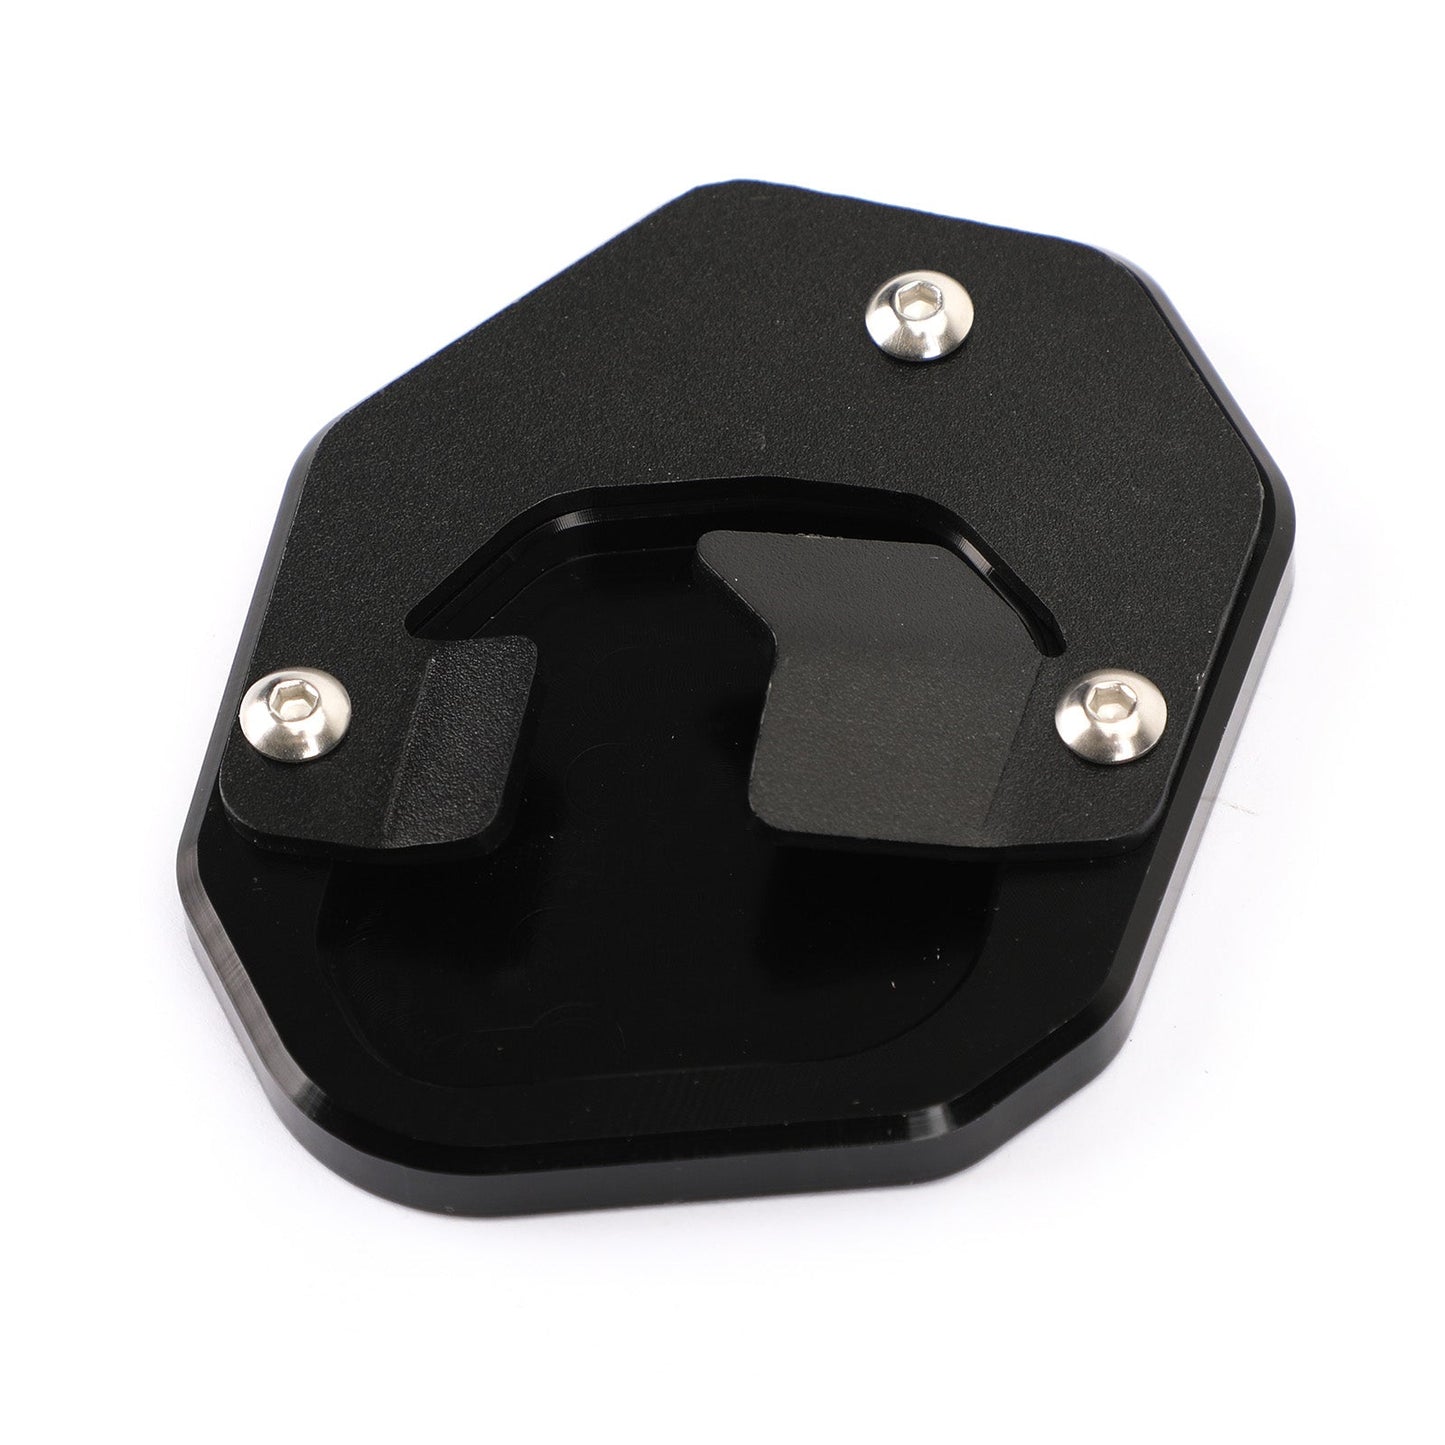 Motorcycle Kickstand Enlarge Plate Pad fit for Yamaha Tenere 700 2019-2020 Black